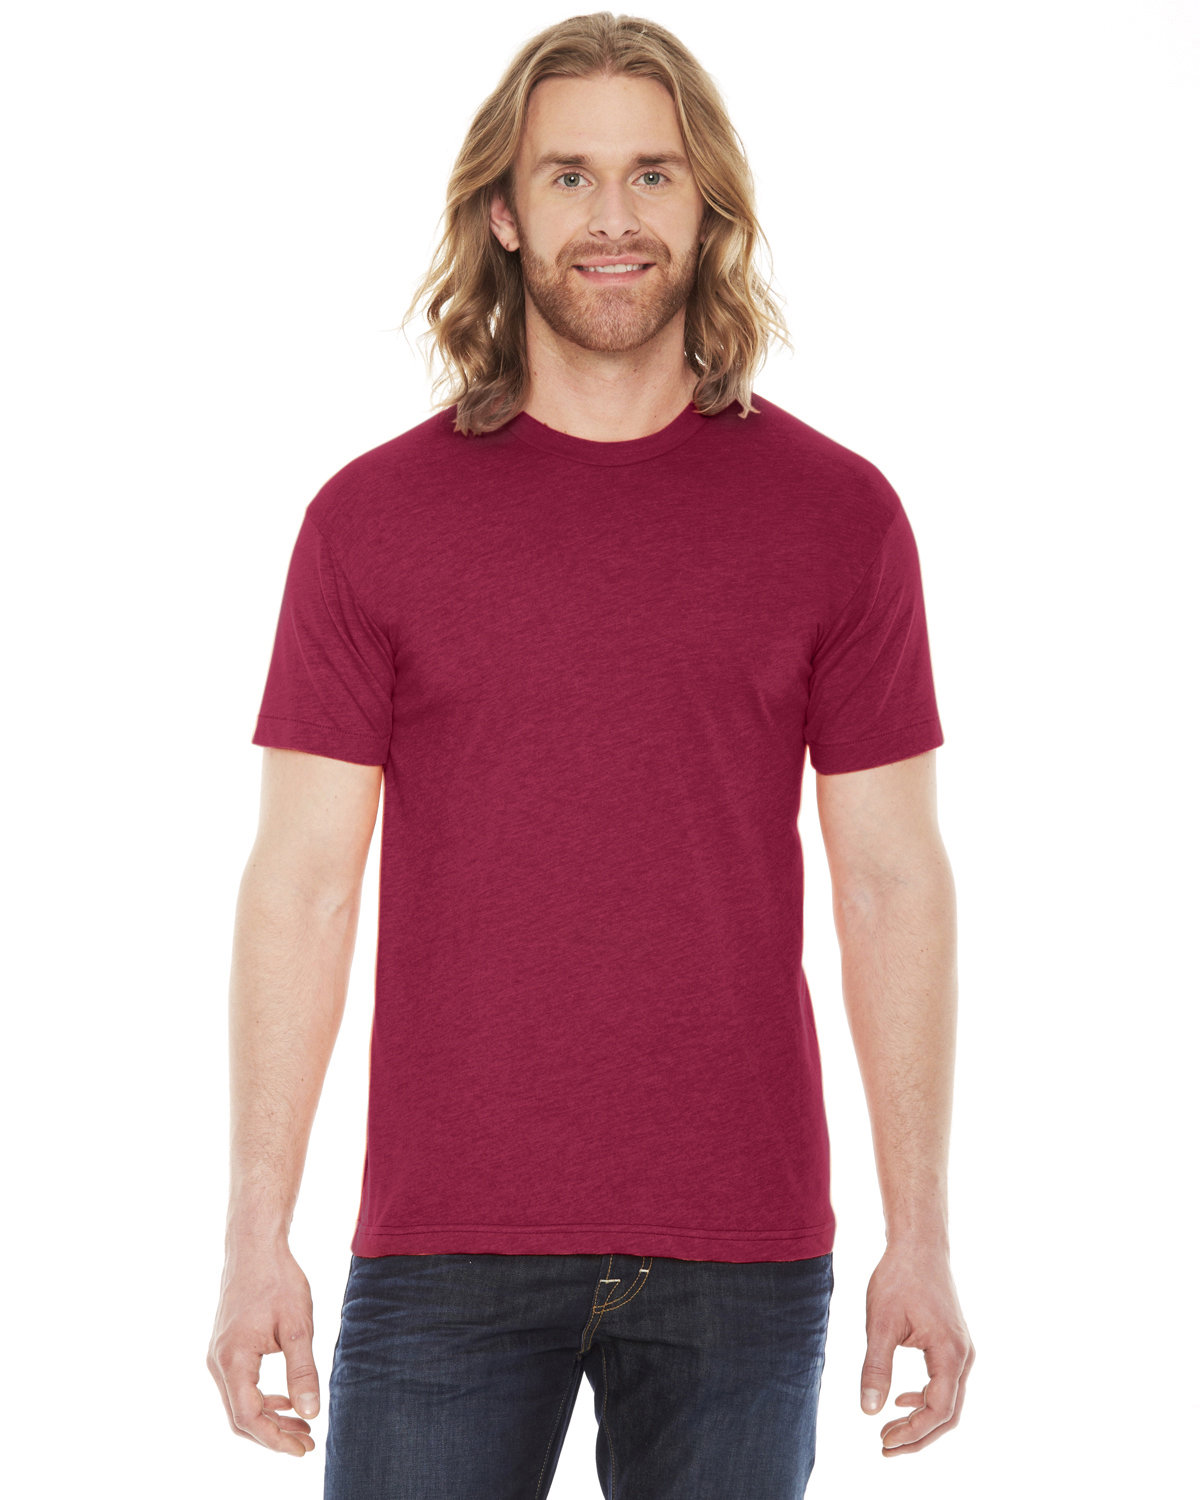 American Apparel Unisex Classic T-Shirt HEATHER RED 